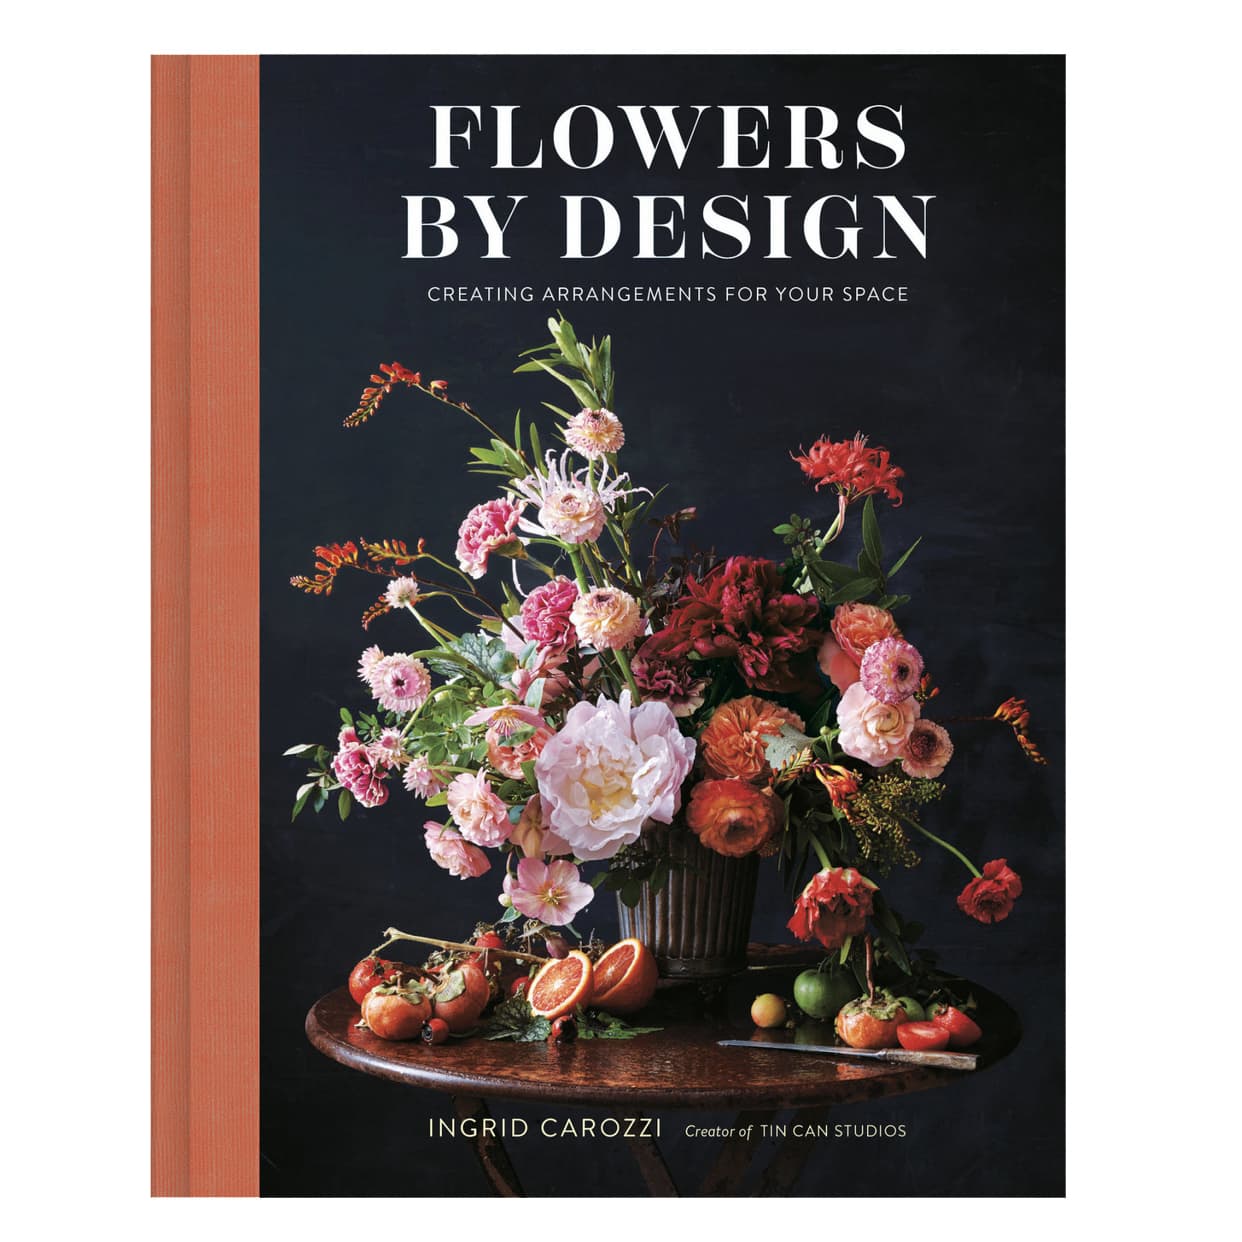 FLOWERS BY DESIGN